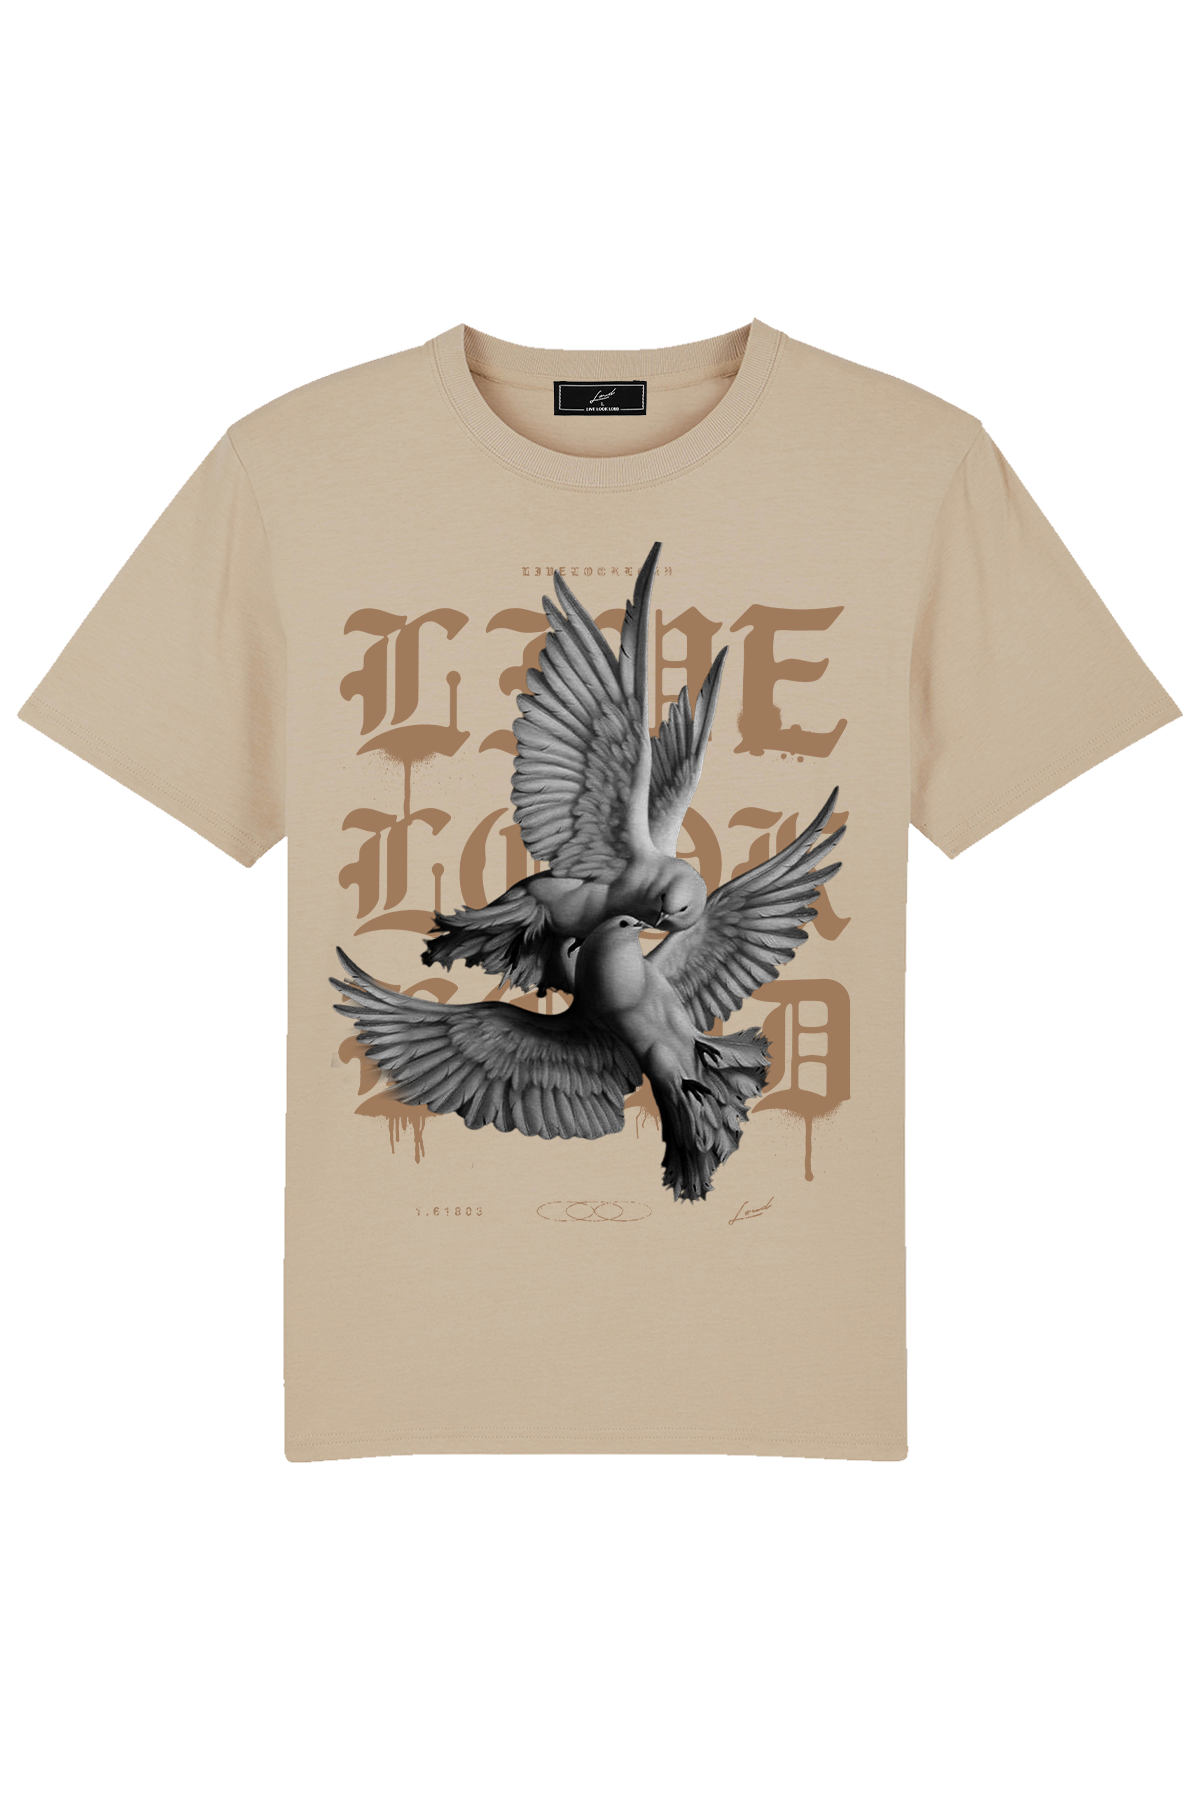 Loud Twin Flames Graphic Sand T-Shirt - Live Look Loud